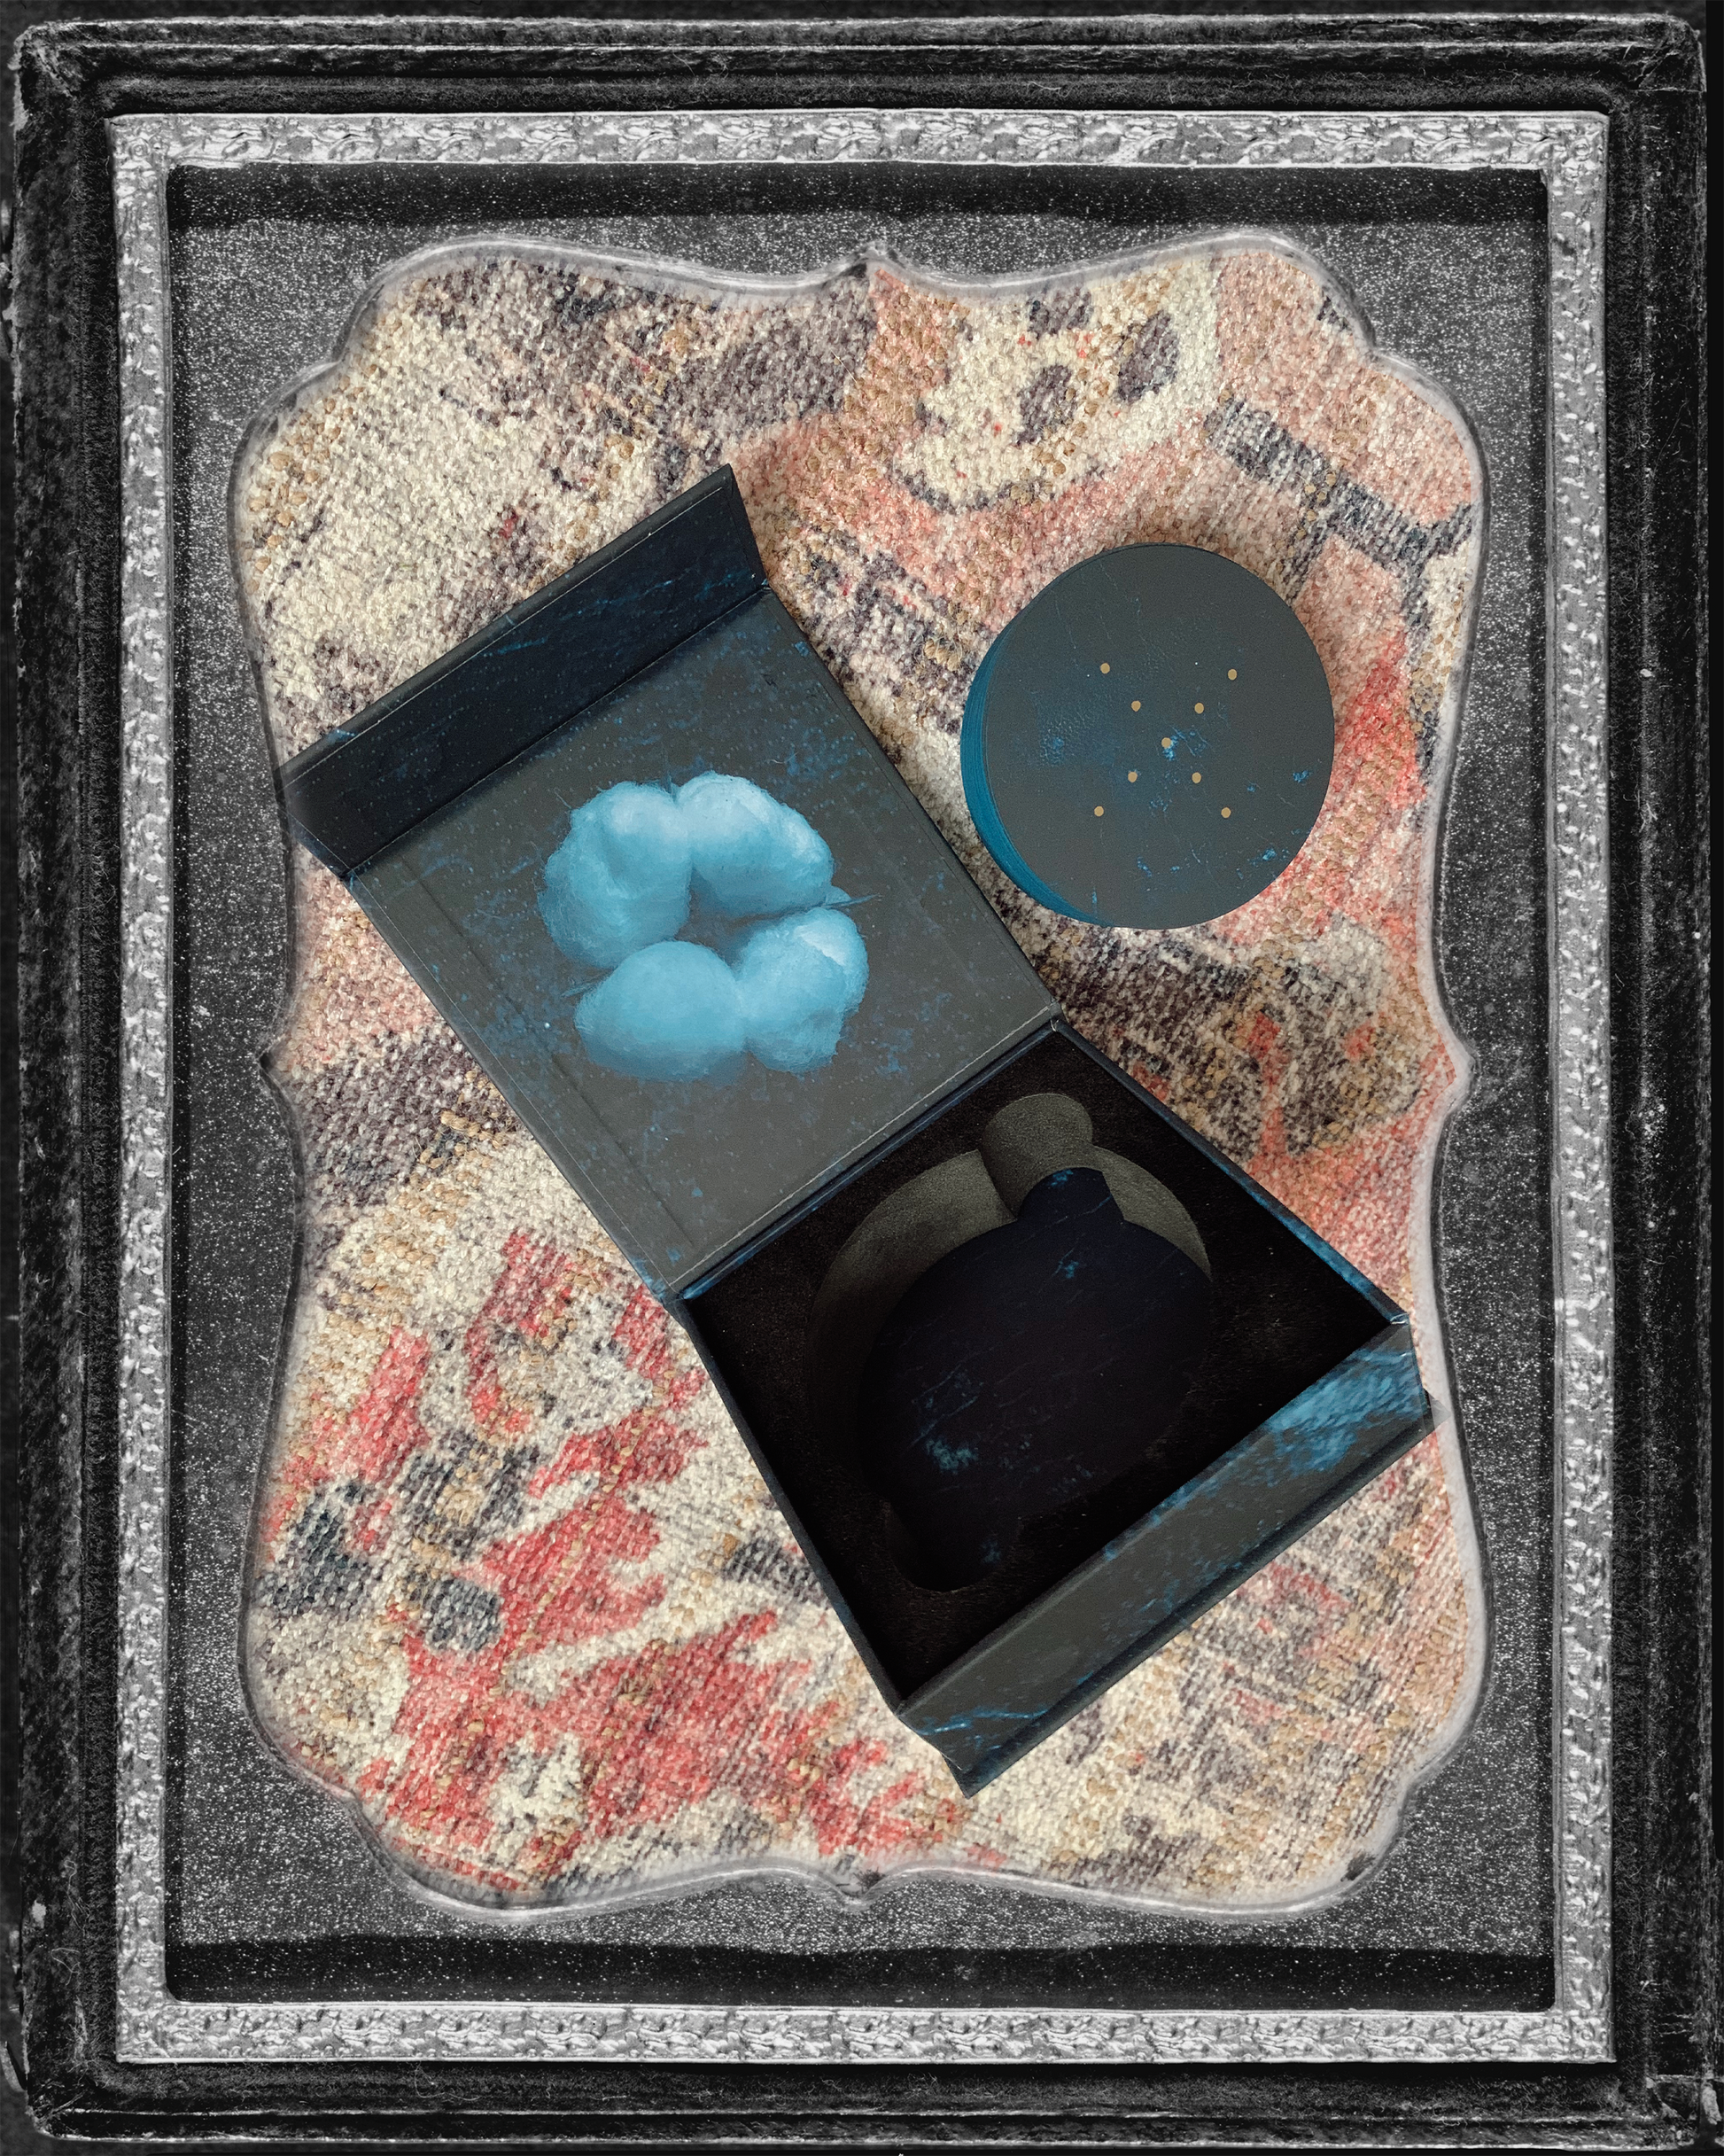 inside a vintage silver frame is a photo of the interior of the square box for Grandma Baby's 52 Blues, next to a pile of cards, on a colorful flat weave carpet.